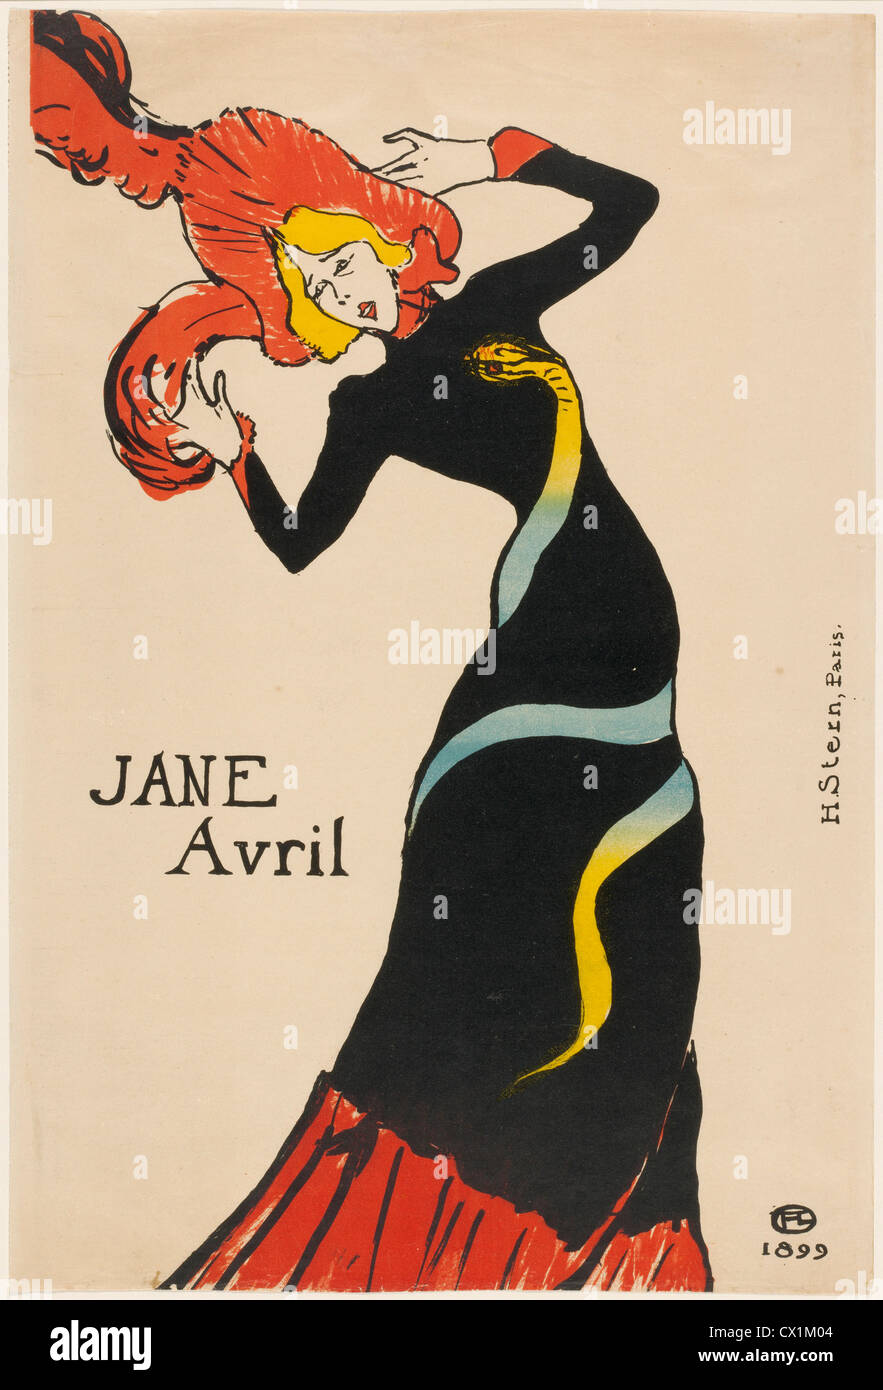 Henri de Toulouse-Lautrec (French, 1864 - 1901 ), Jane Avril, 1899, 5-color lithograph [poster] on thin wove paper Stock Photo